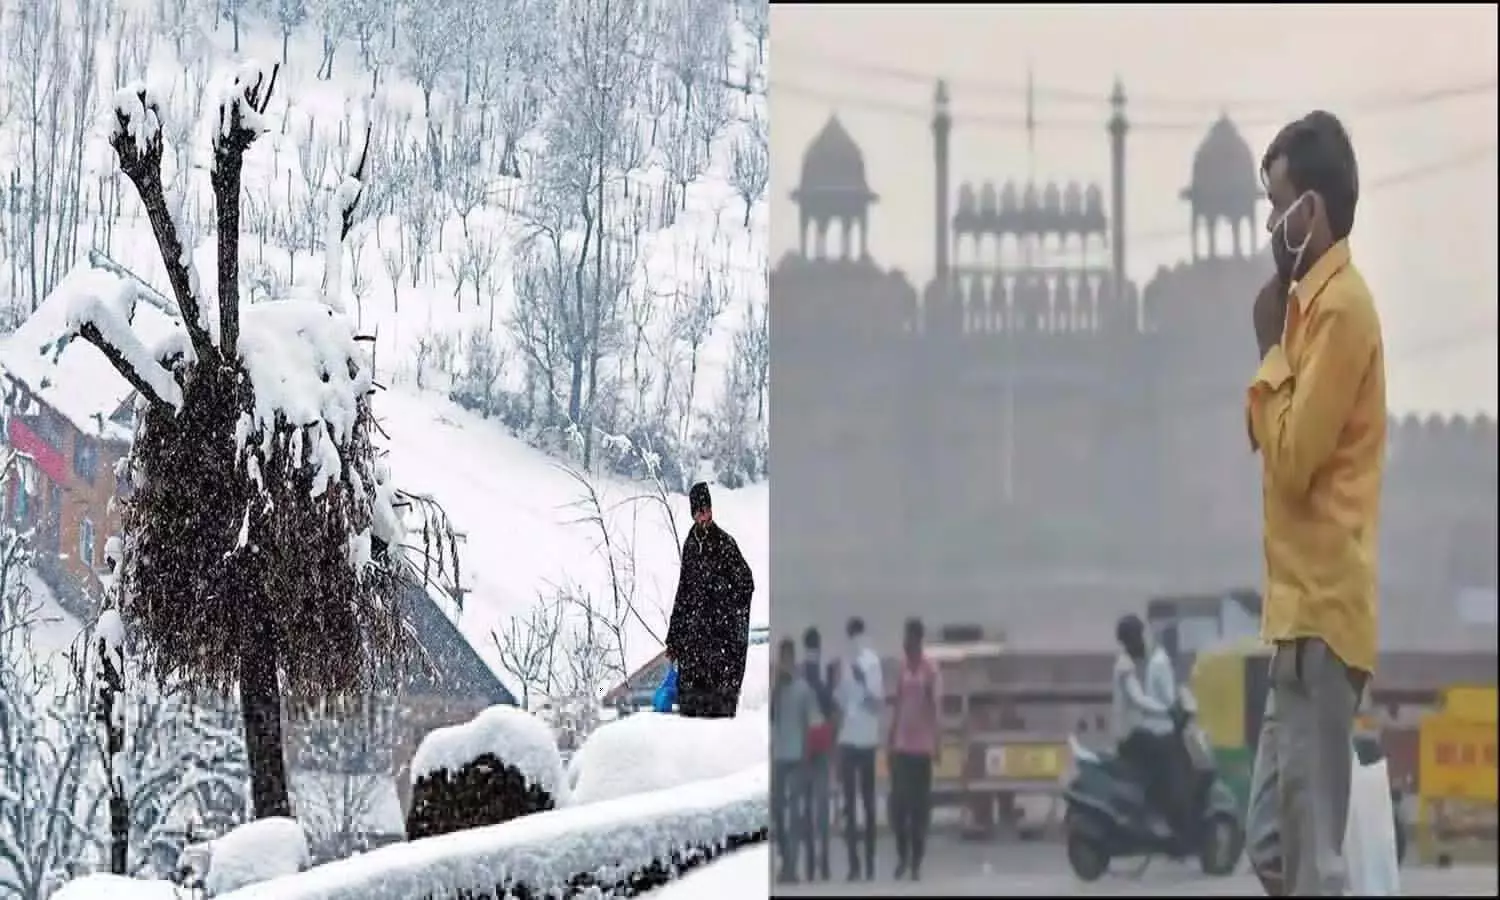 Snowfall will be accompanied by rain in hilly areas, it is difficult to breathe in Delhis toxic air